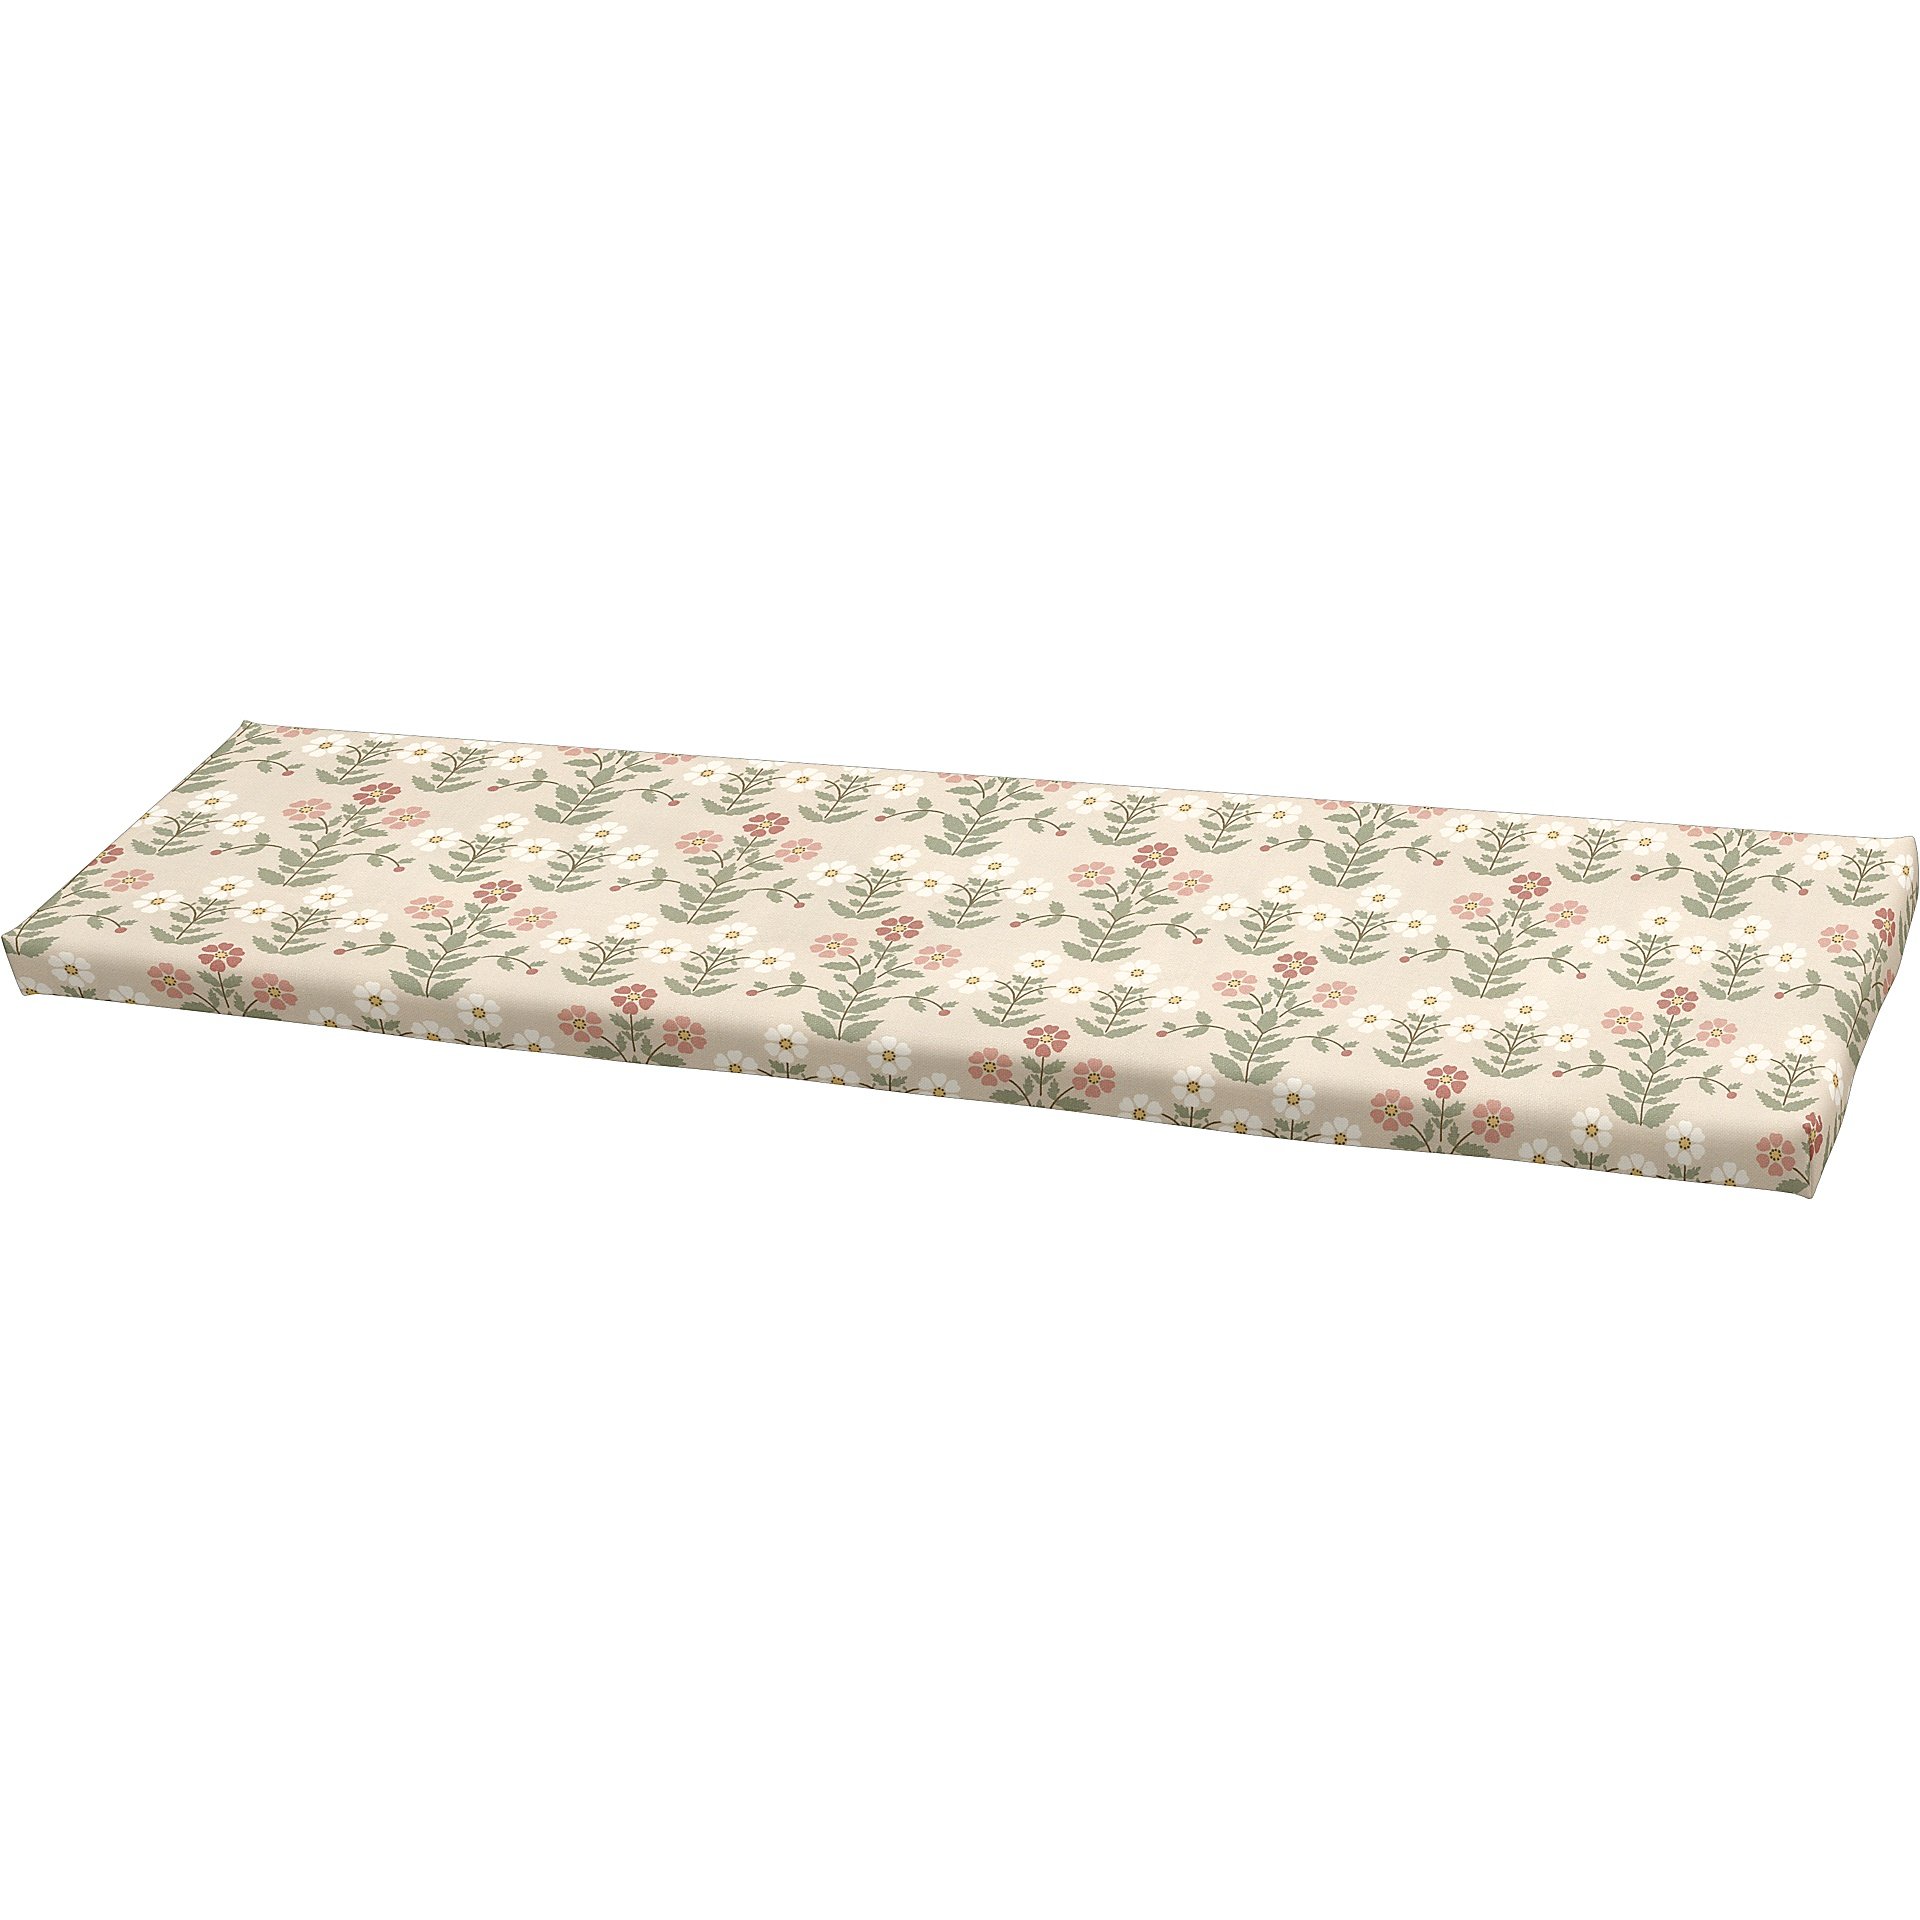 IKEA - Universal bench cushion cover 120x35x3,5 cm, Pink Sippor, BEMZ x BORASTAPETER COLLECTION - Be